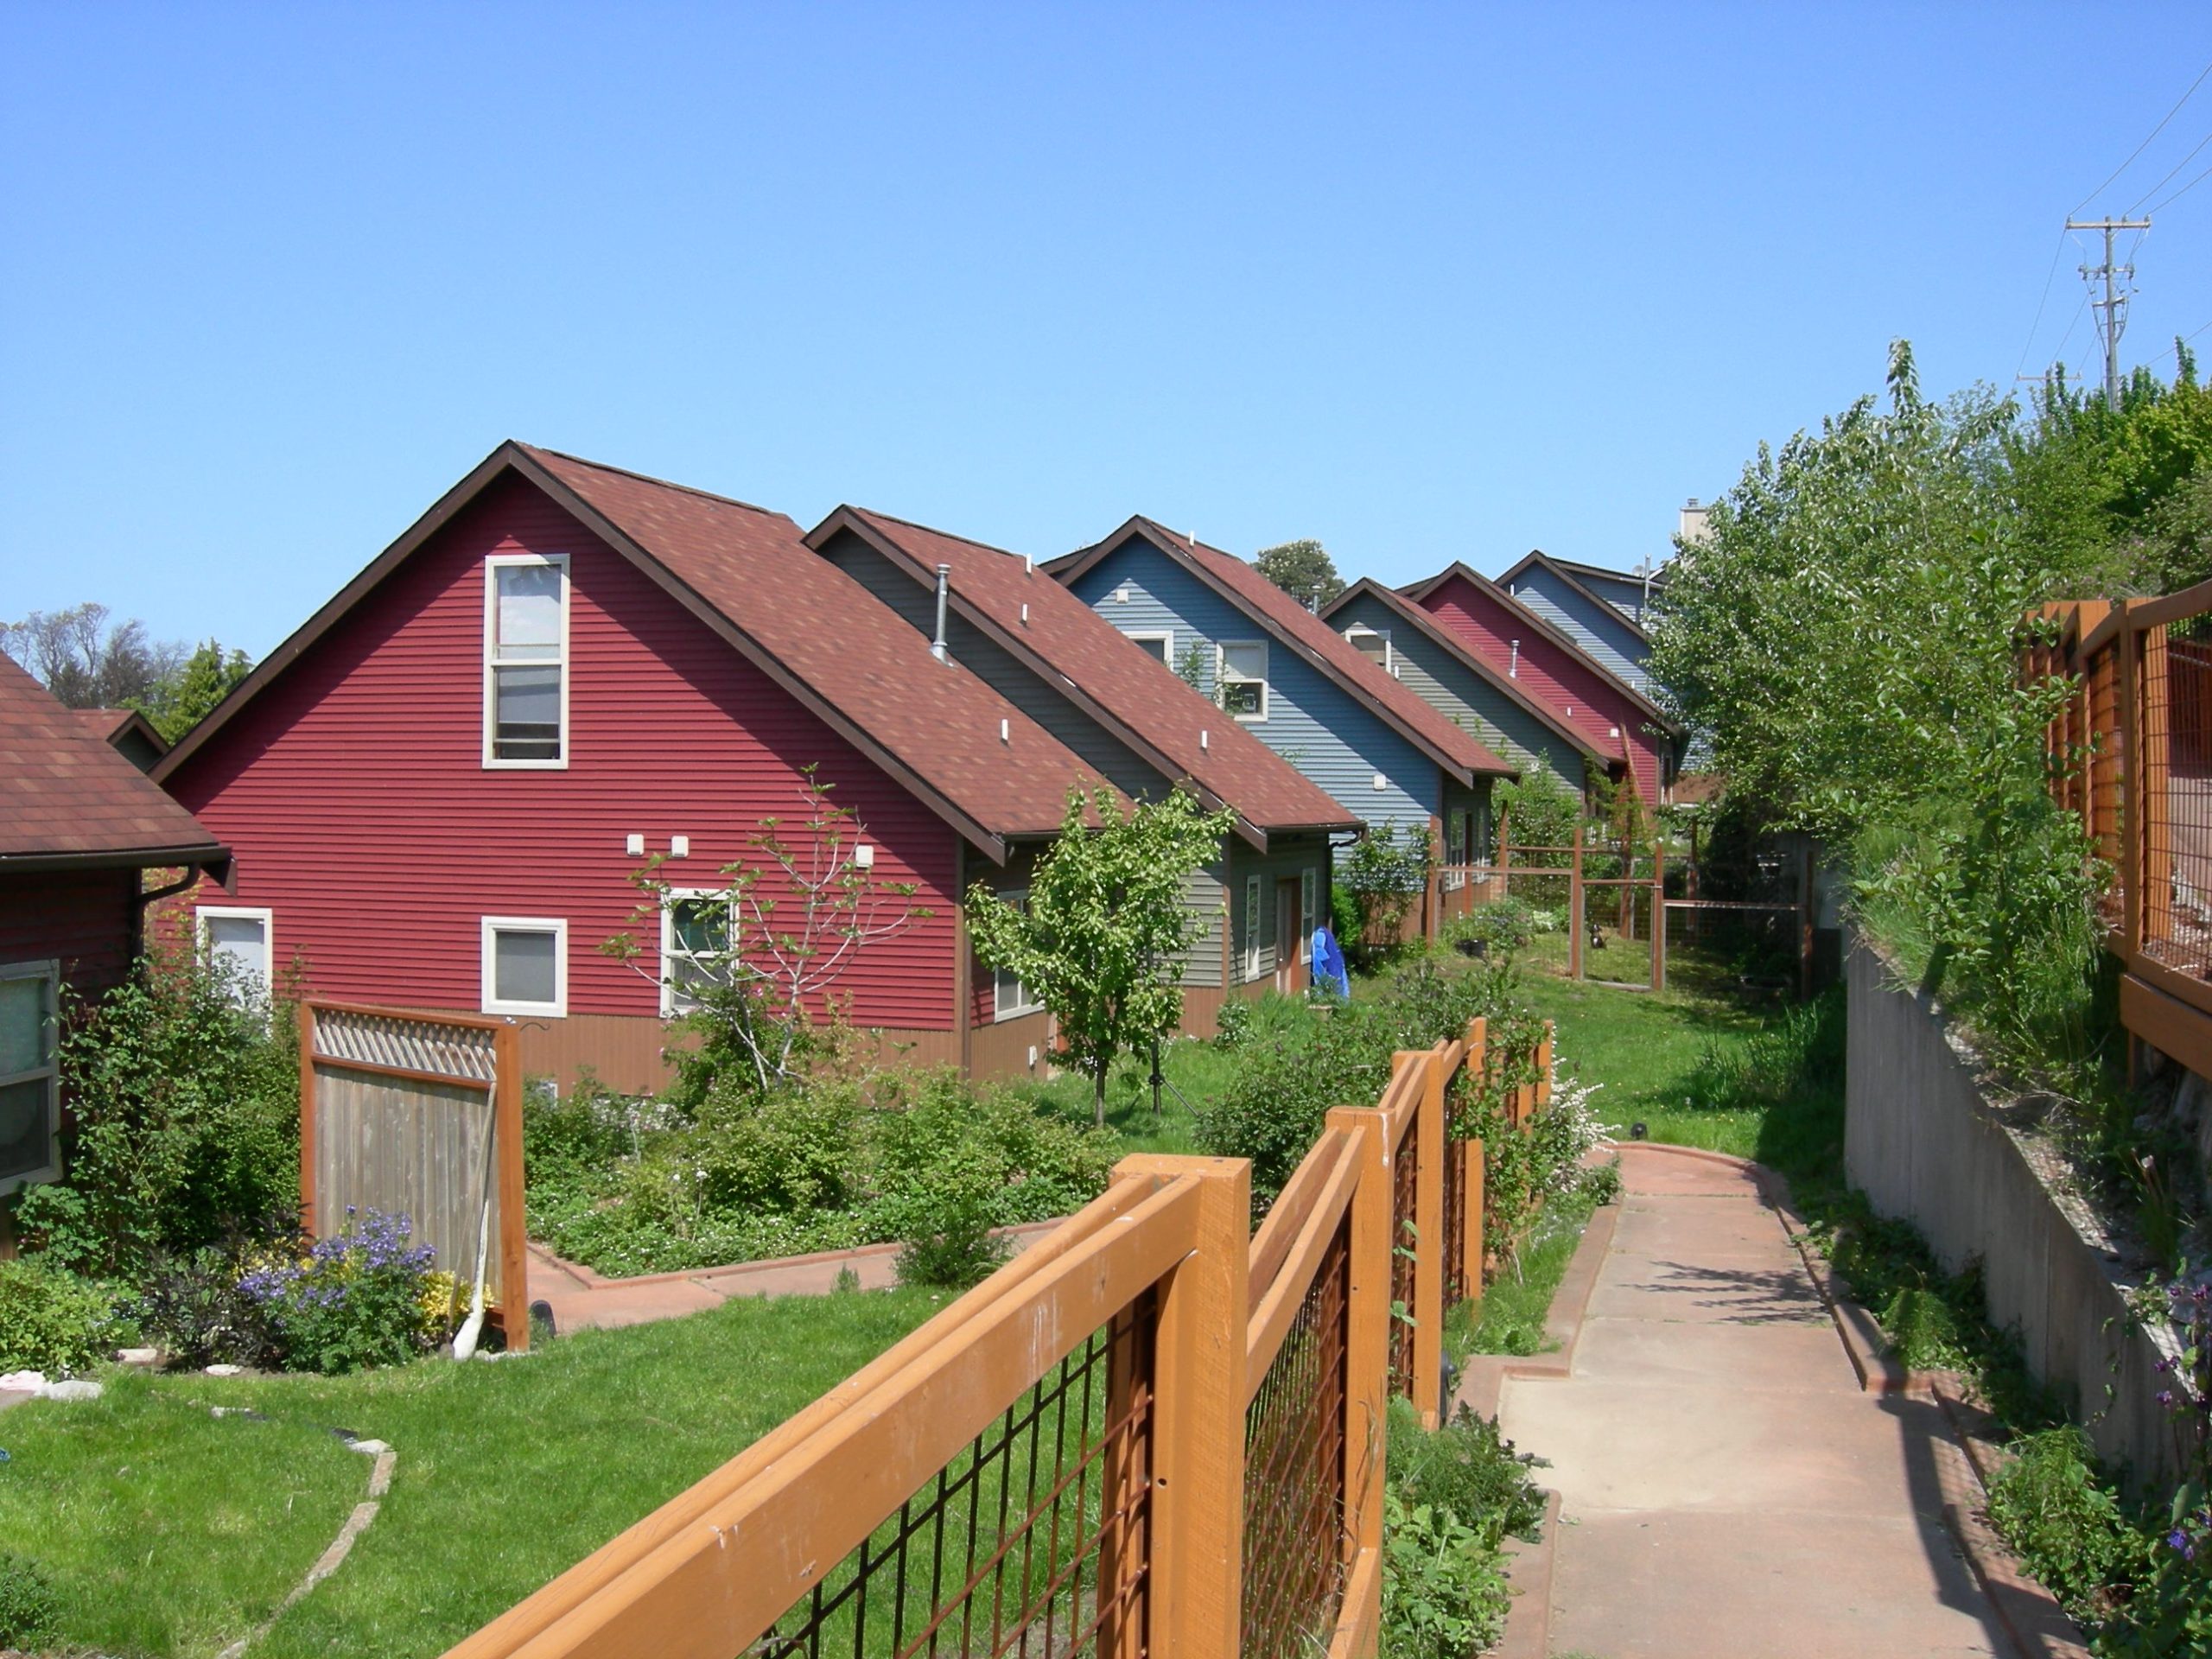 What Is Cohousing?